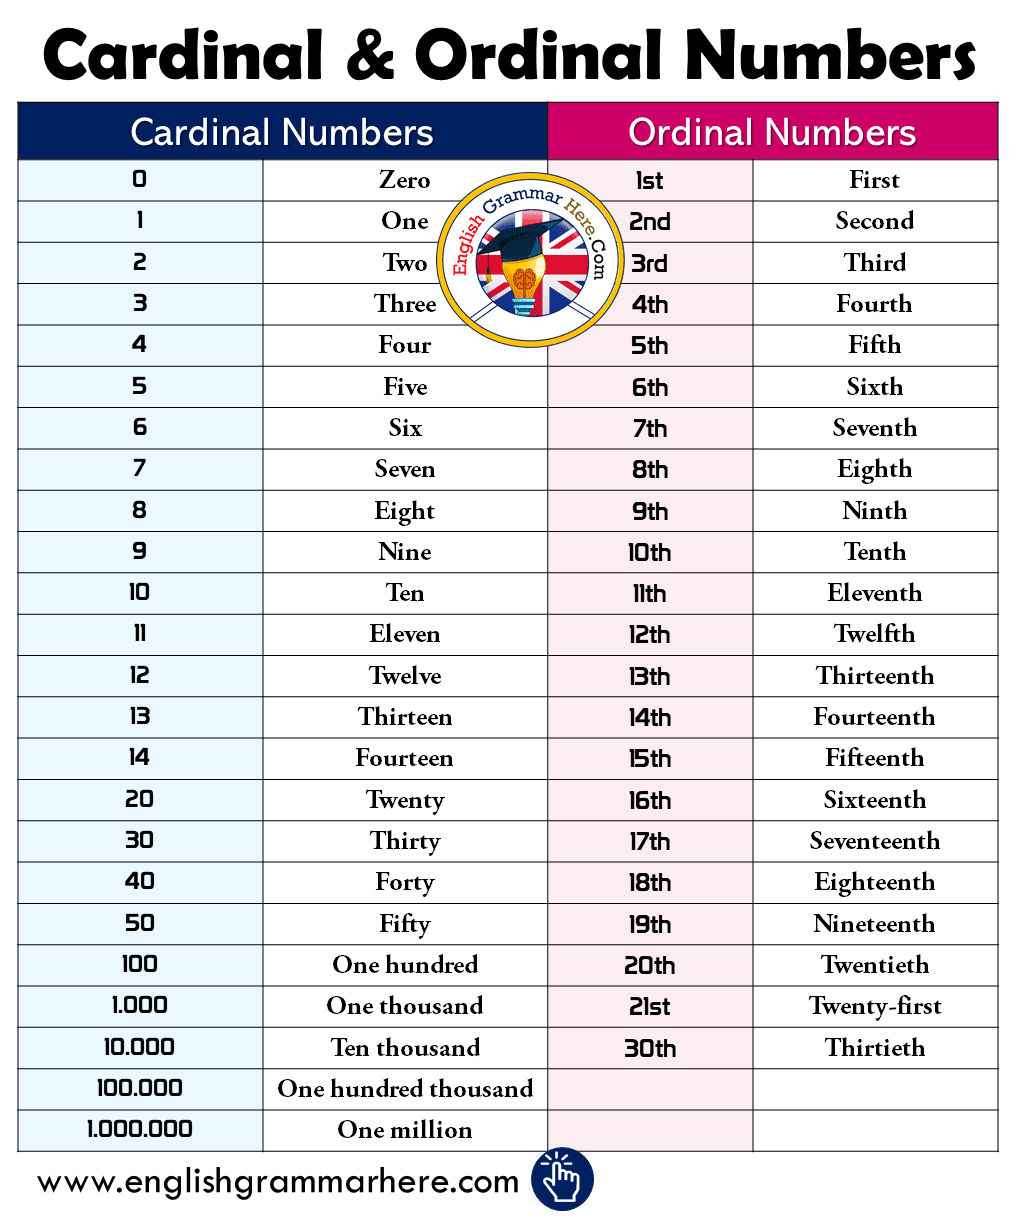 cardinal-and-ordinal-numbers-lessons-for-english